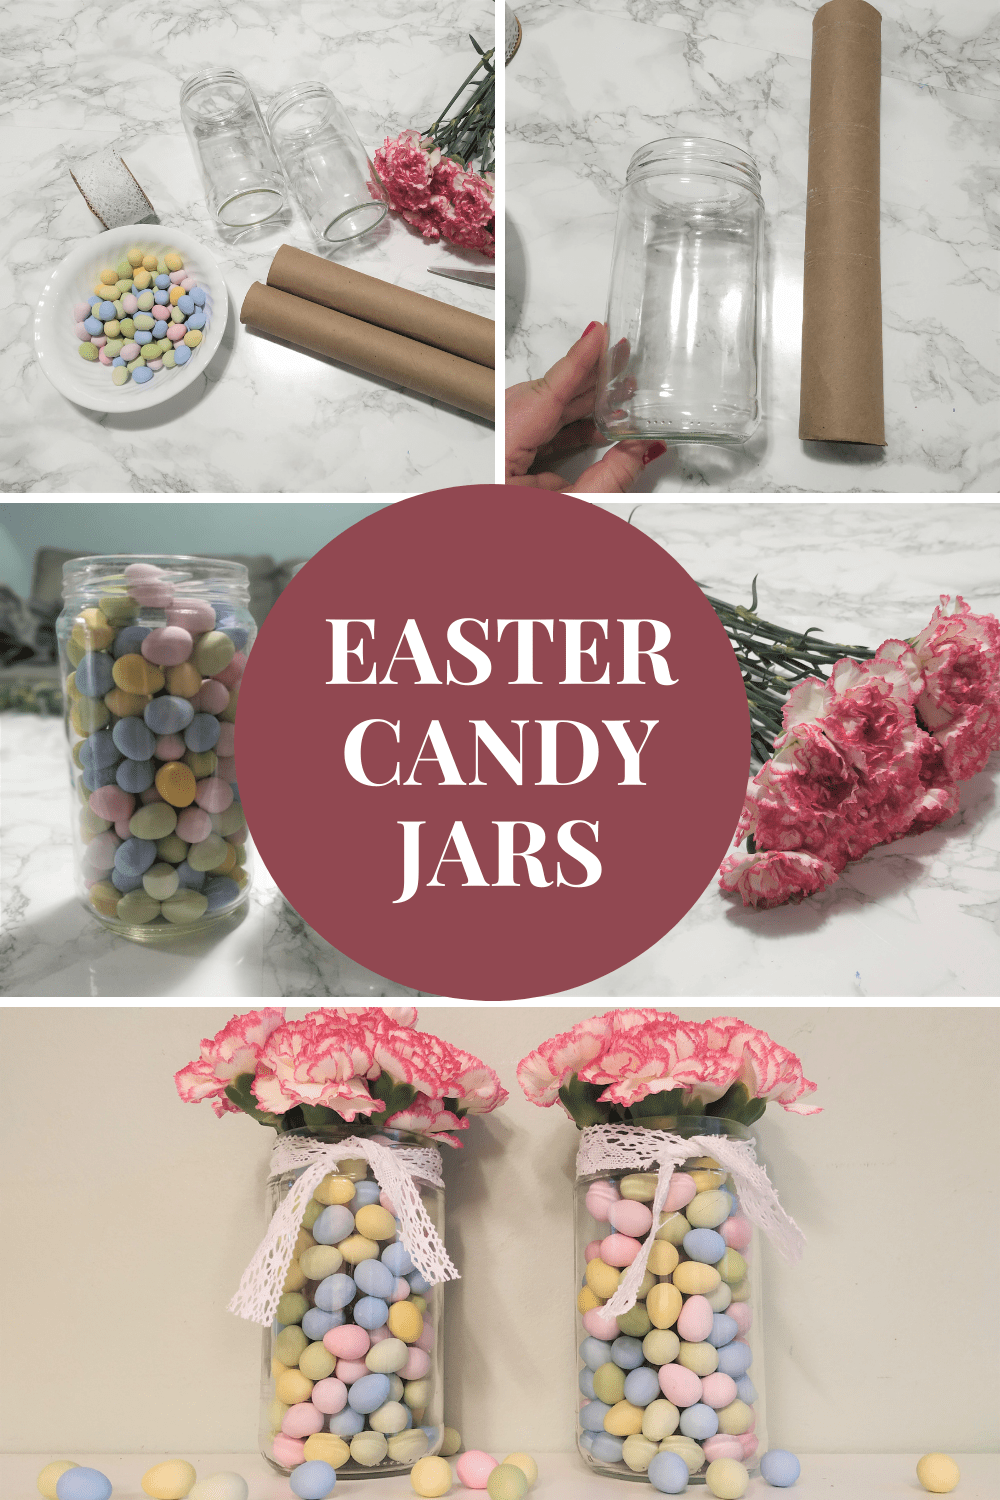 Collage of process pictures to make Easter candy jars with text overlay.